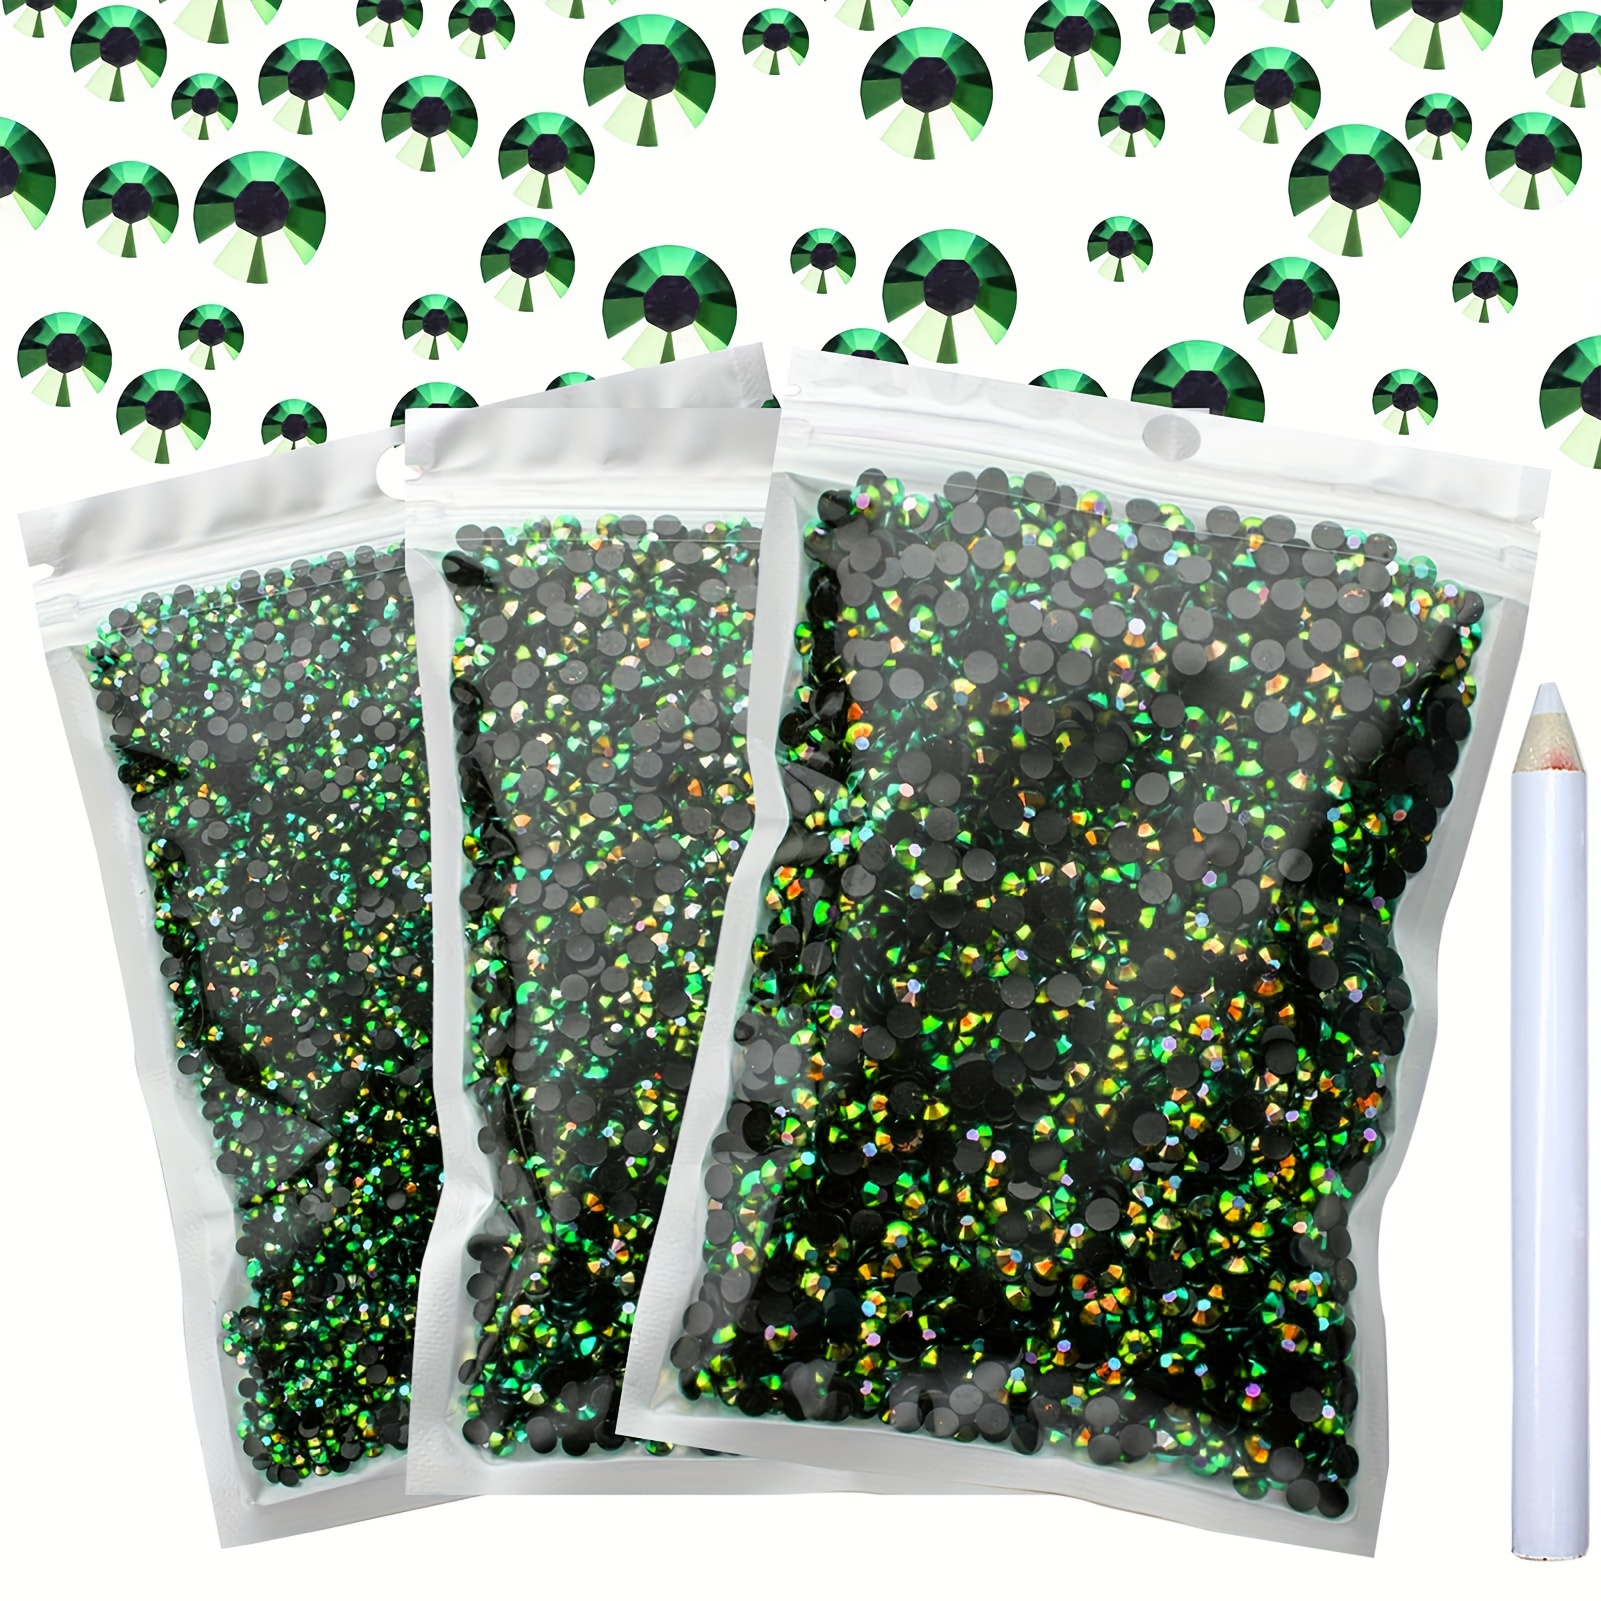 

6000pcs 3/4/5mm Golden Green Ab Flat Back Jelly Resin Rhinestones Non-hotfix Crystal Beads For Diy Nail Art, Face Makeup, Shoes, Clothes, Bags Jewelry Making Decorative Accessories